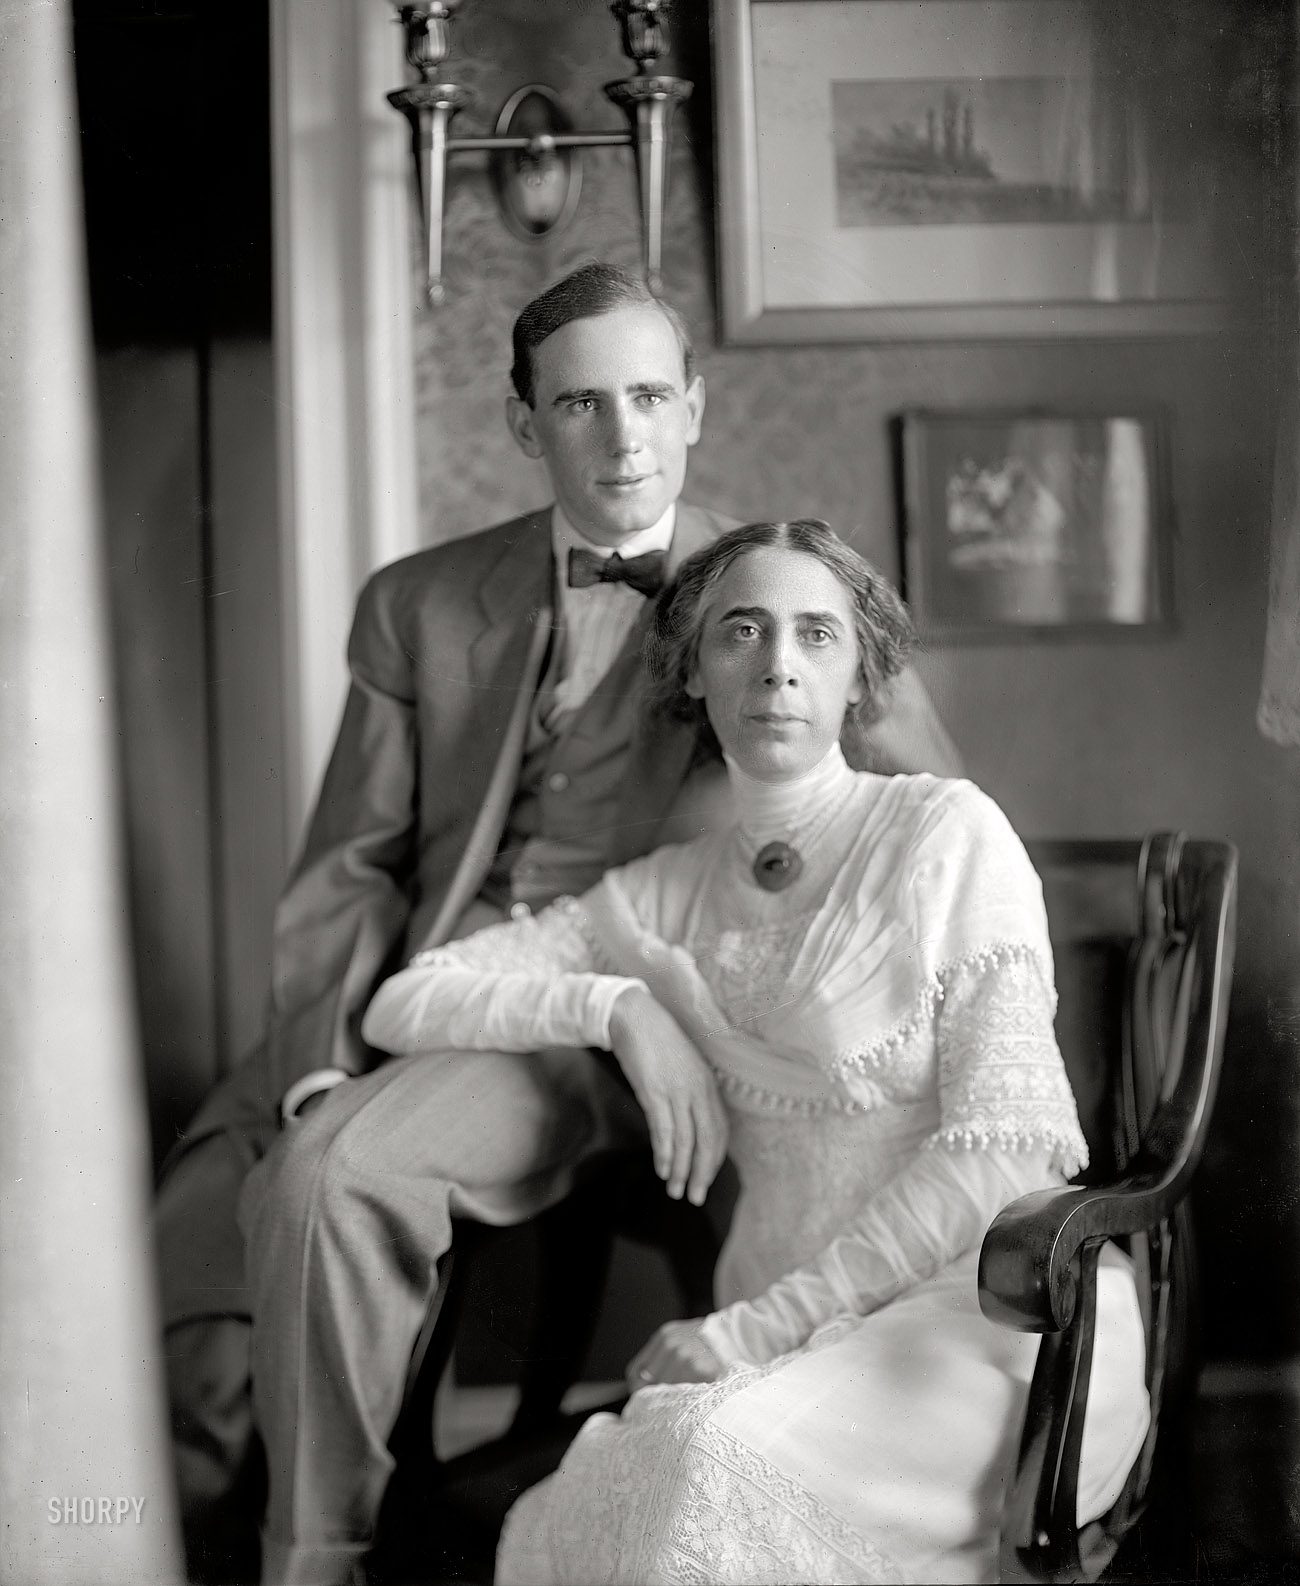 Washington, D.C., circa 1912. "Mrs. Champ Clark and son." Genevieve Clark, wife of House Speaker Champ Clark, and their son, Bennett, the future United States senator last seen here. Harris & Ewing Collection glass negative. View full size.